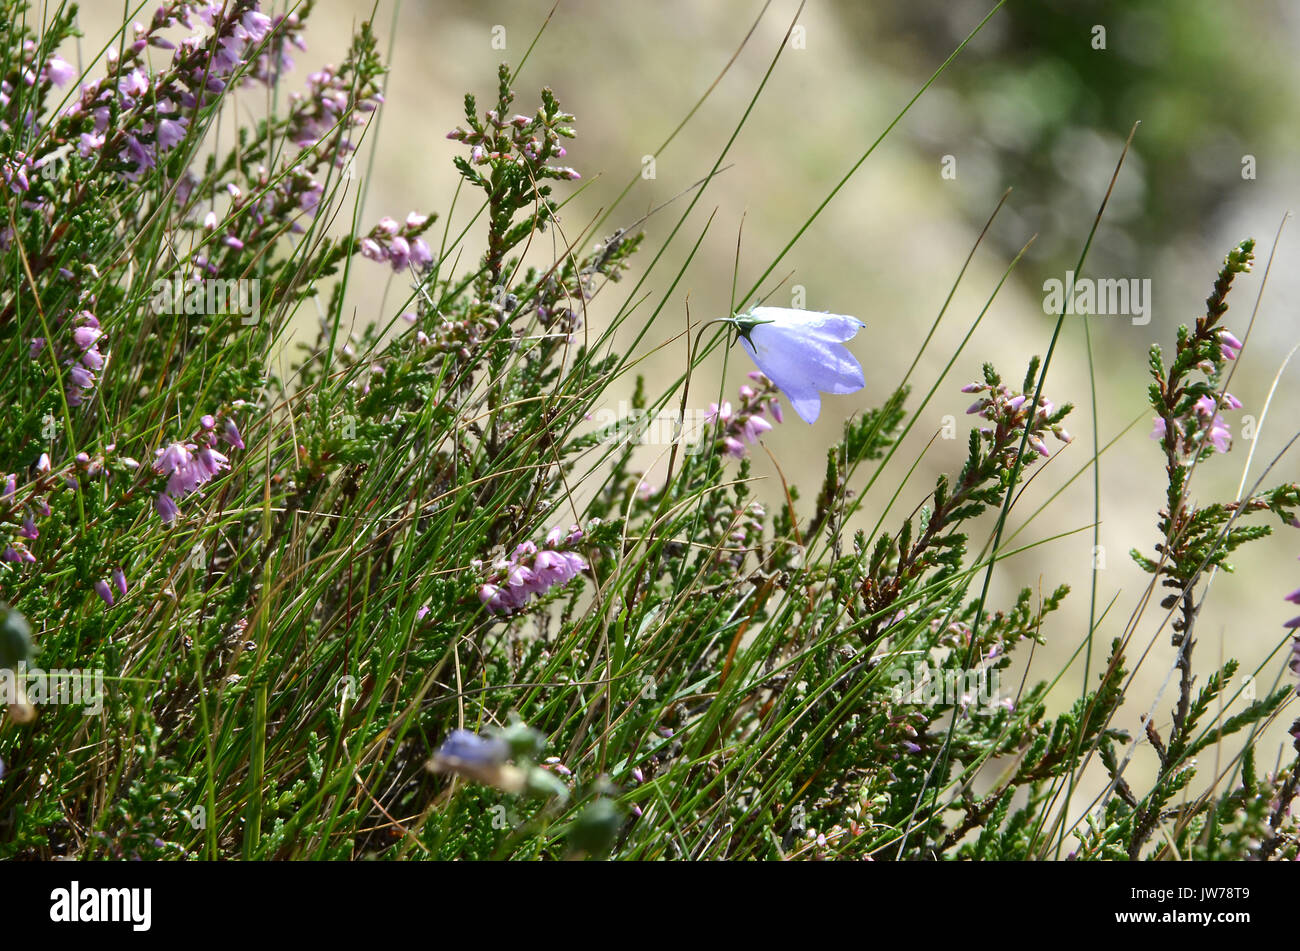 Heather in bloom with a single blue bell flower. Stock Photo